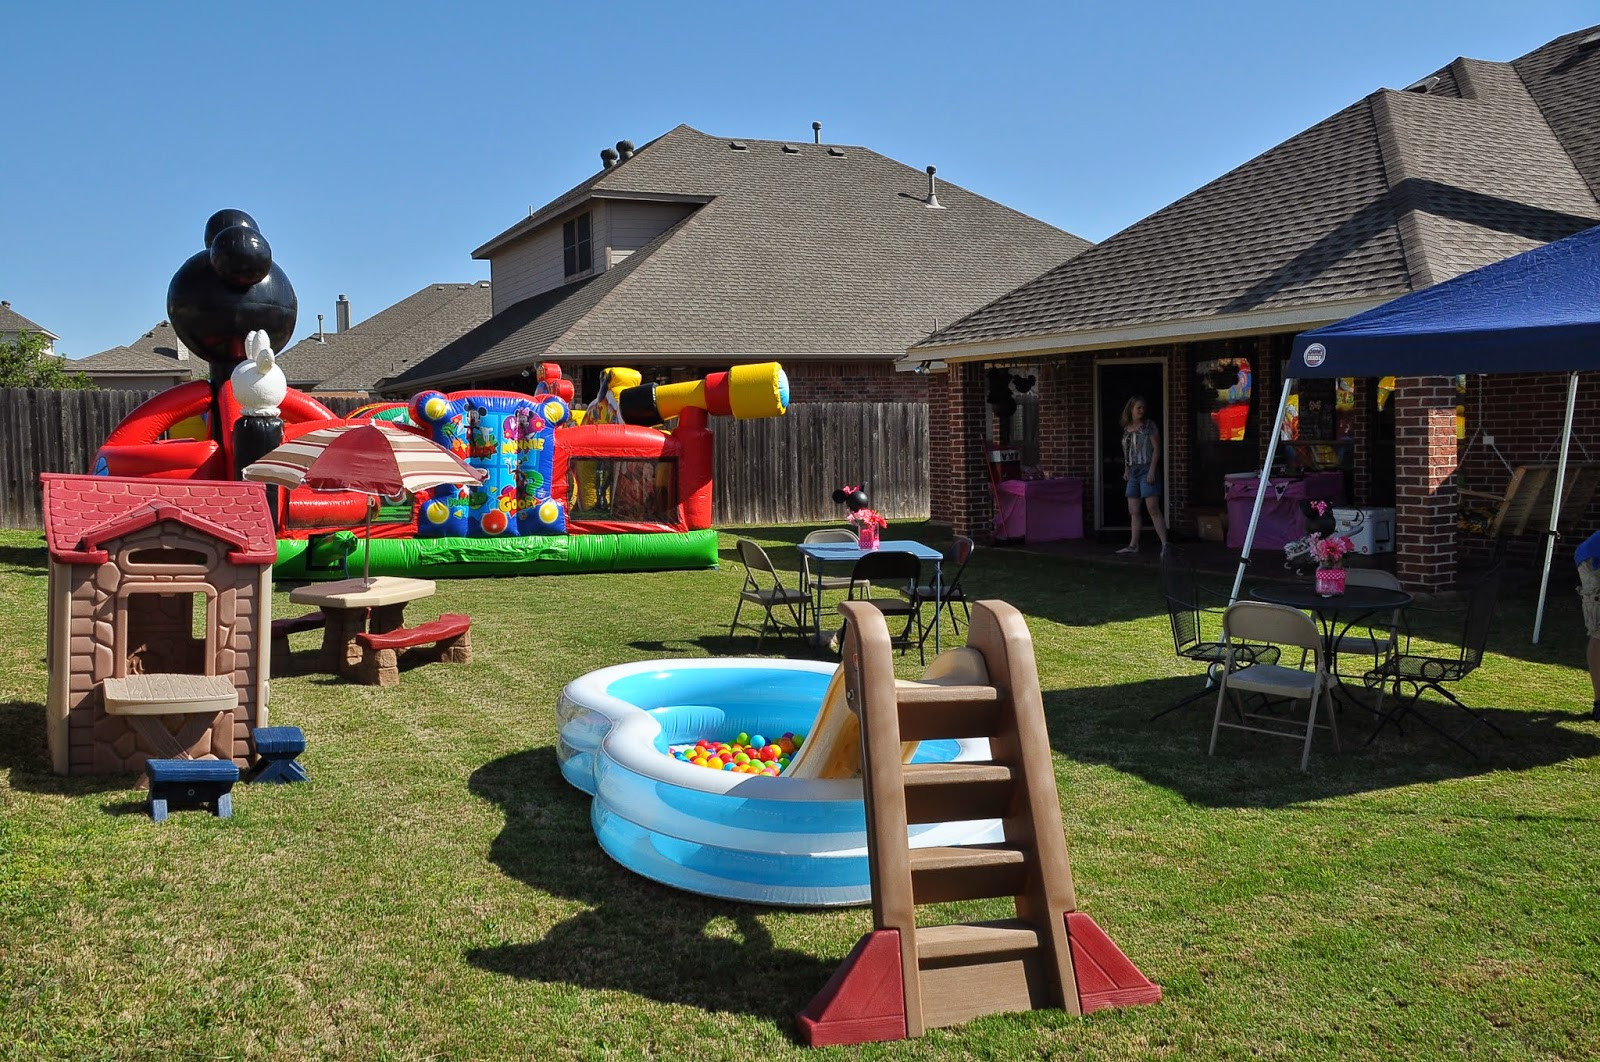 Minnie Mouse Backyard Party Ideas
 Keeping Up With The Morgans Callie s Minnie Birthday Party